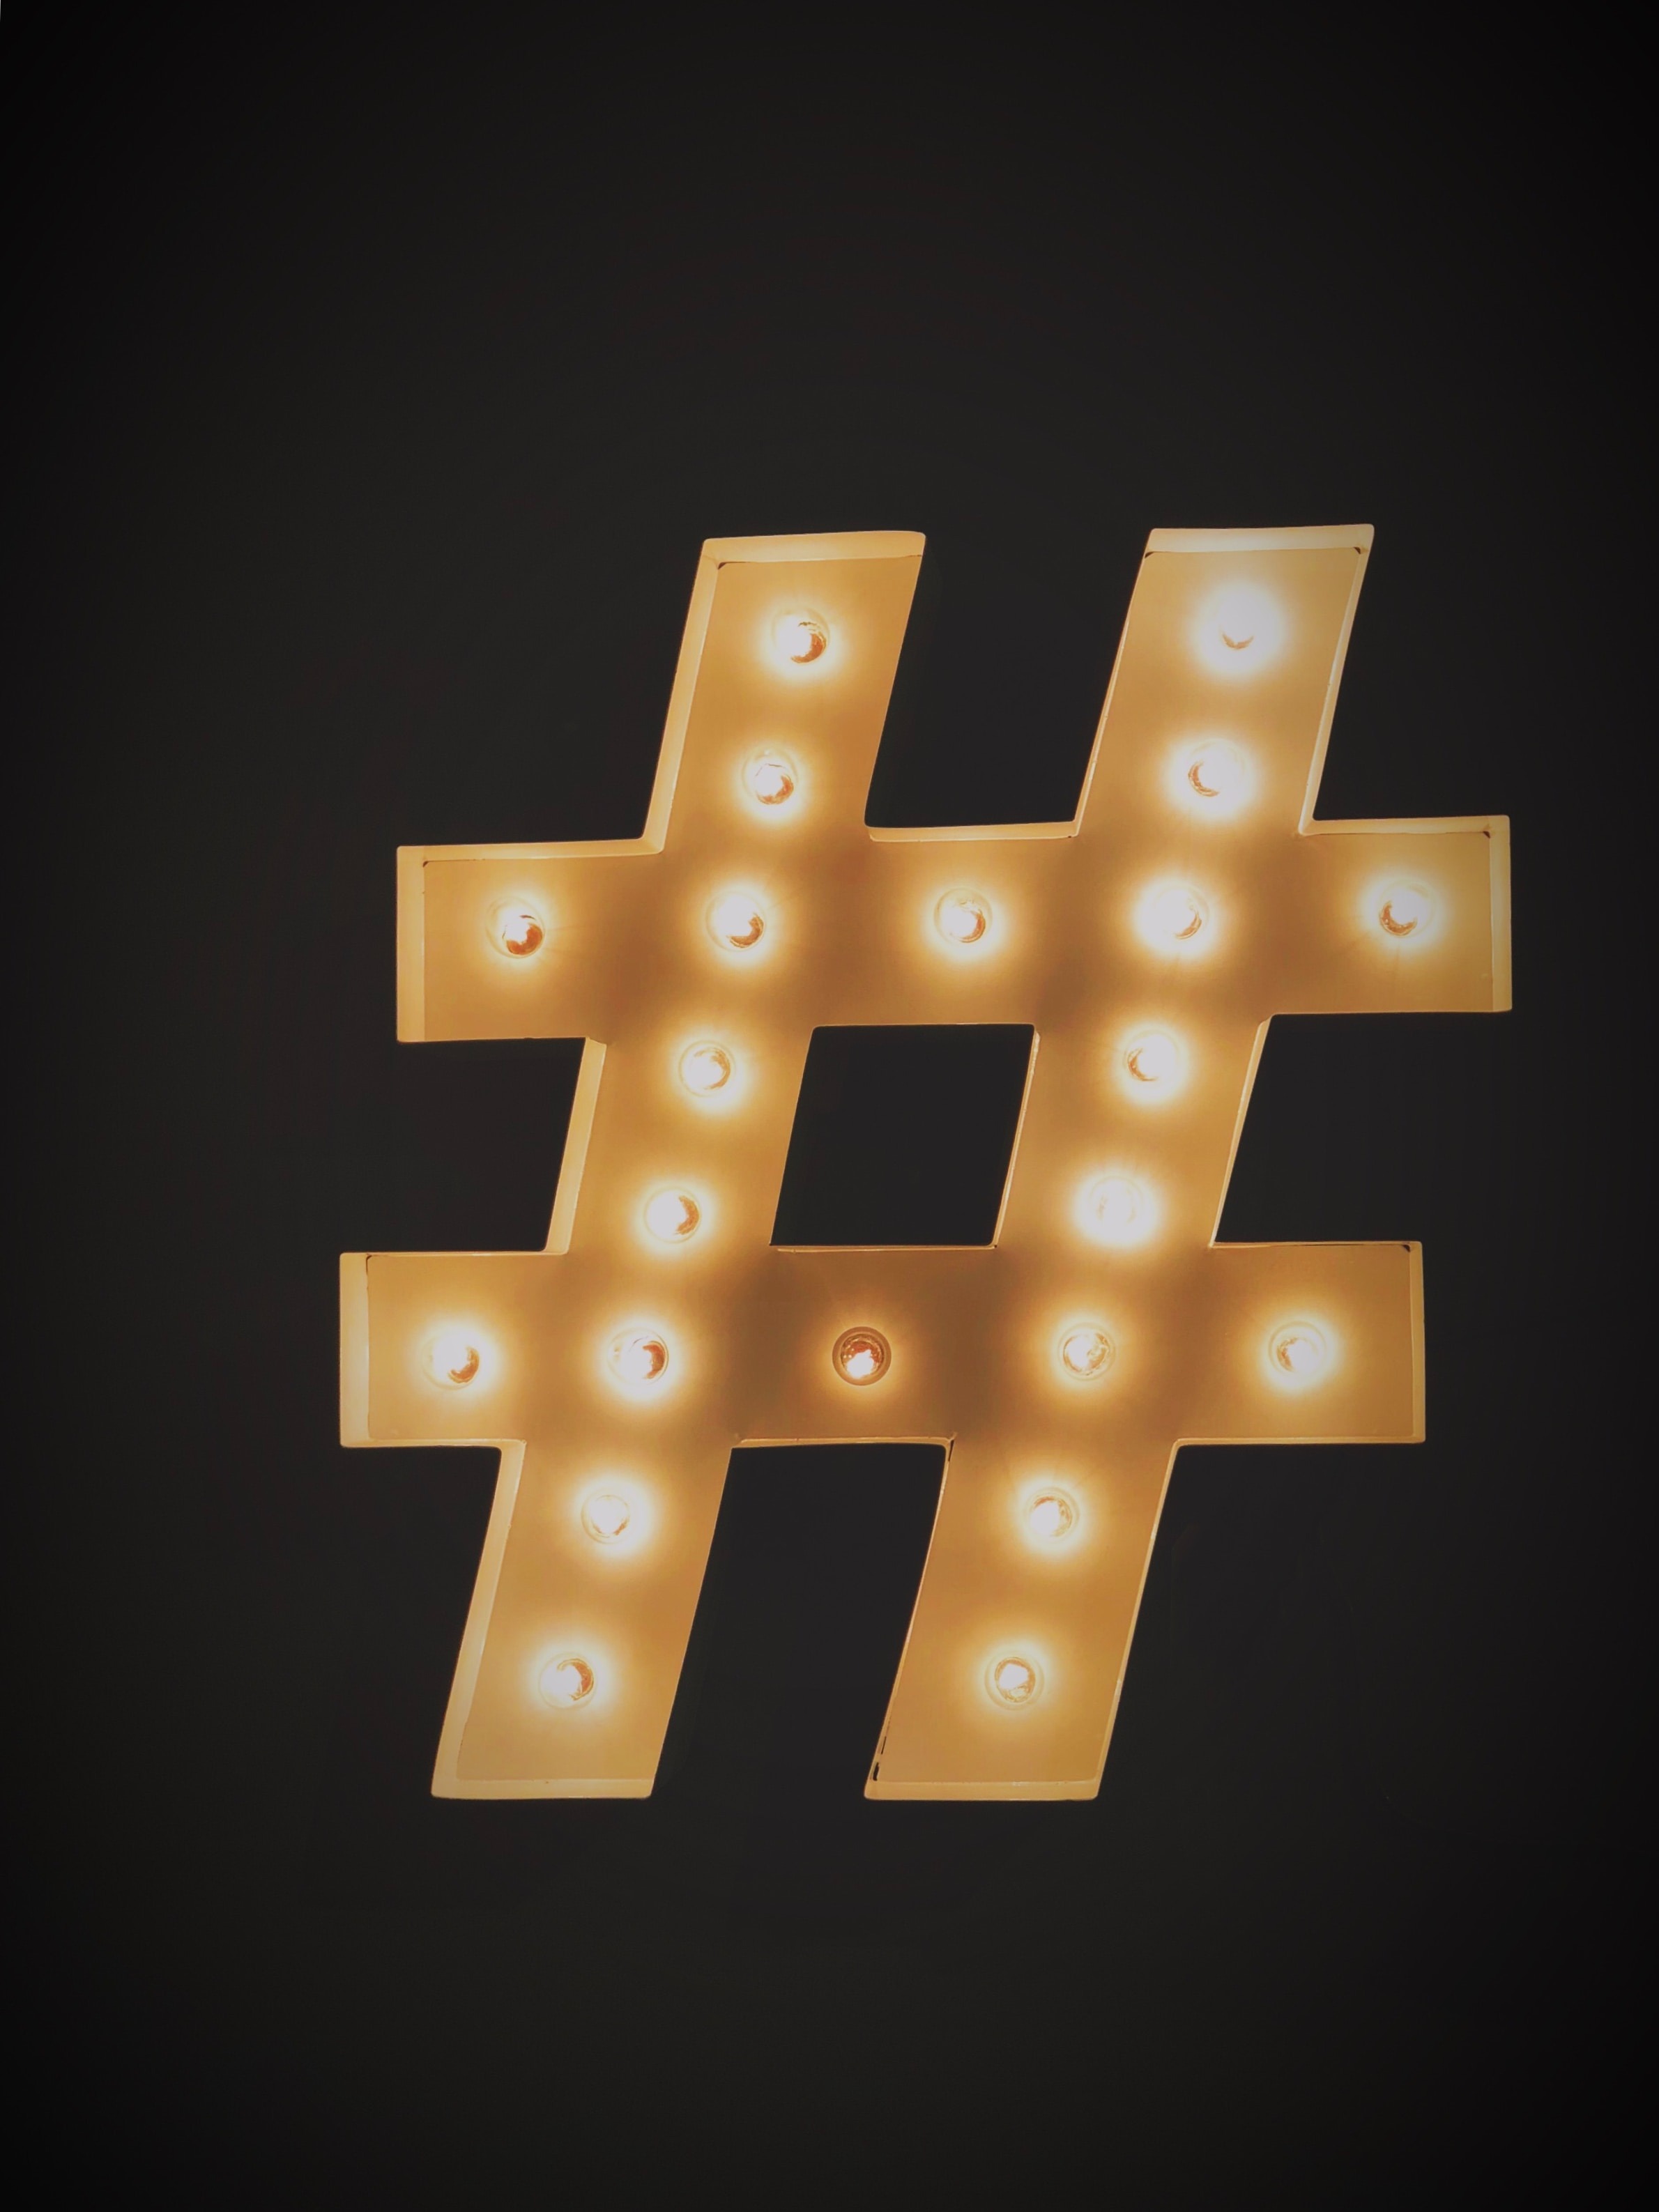 using hashtags in marketing